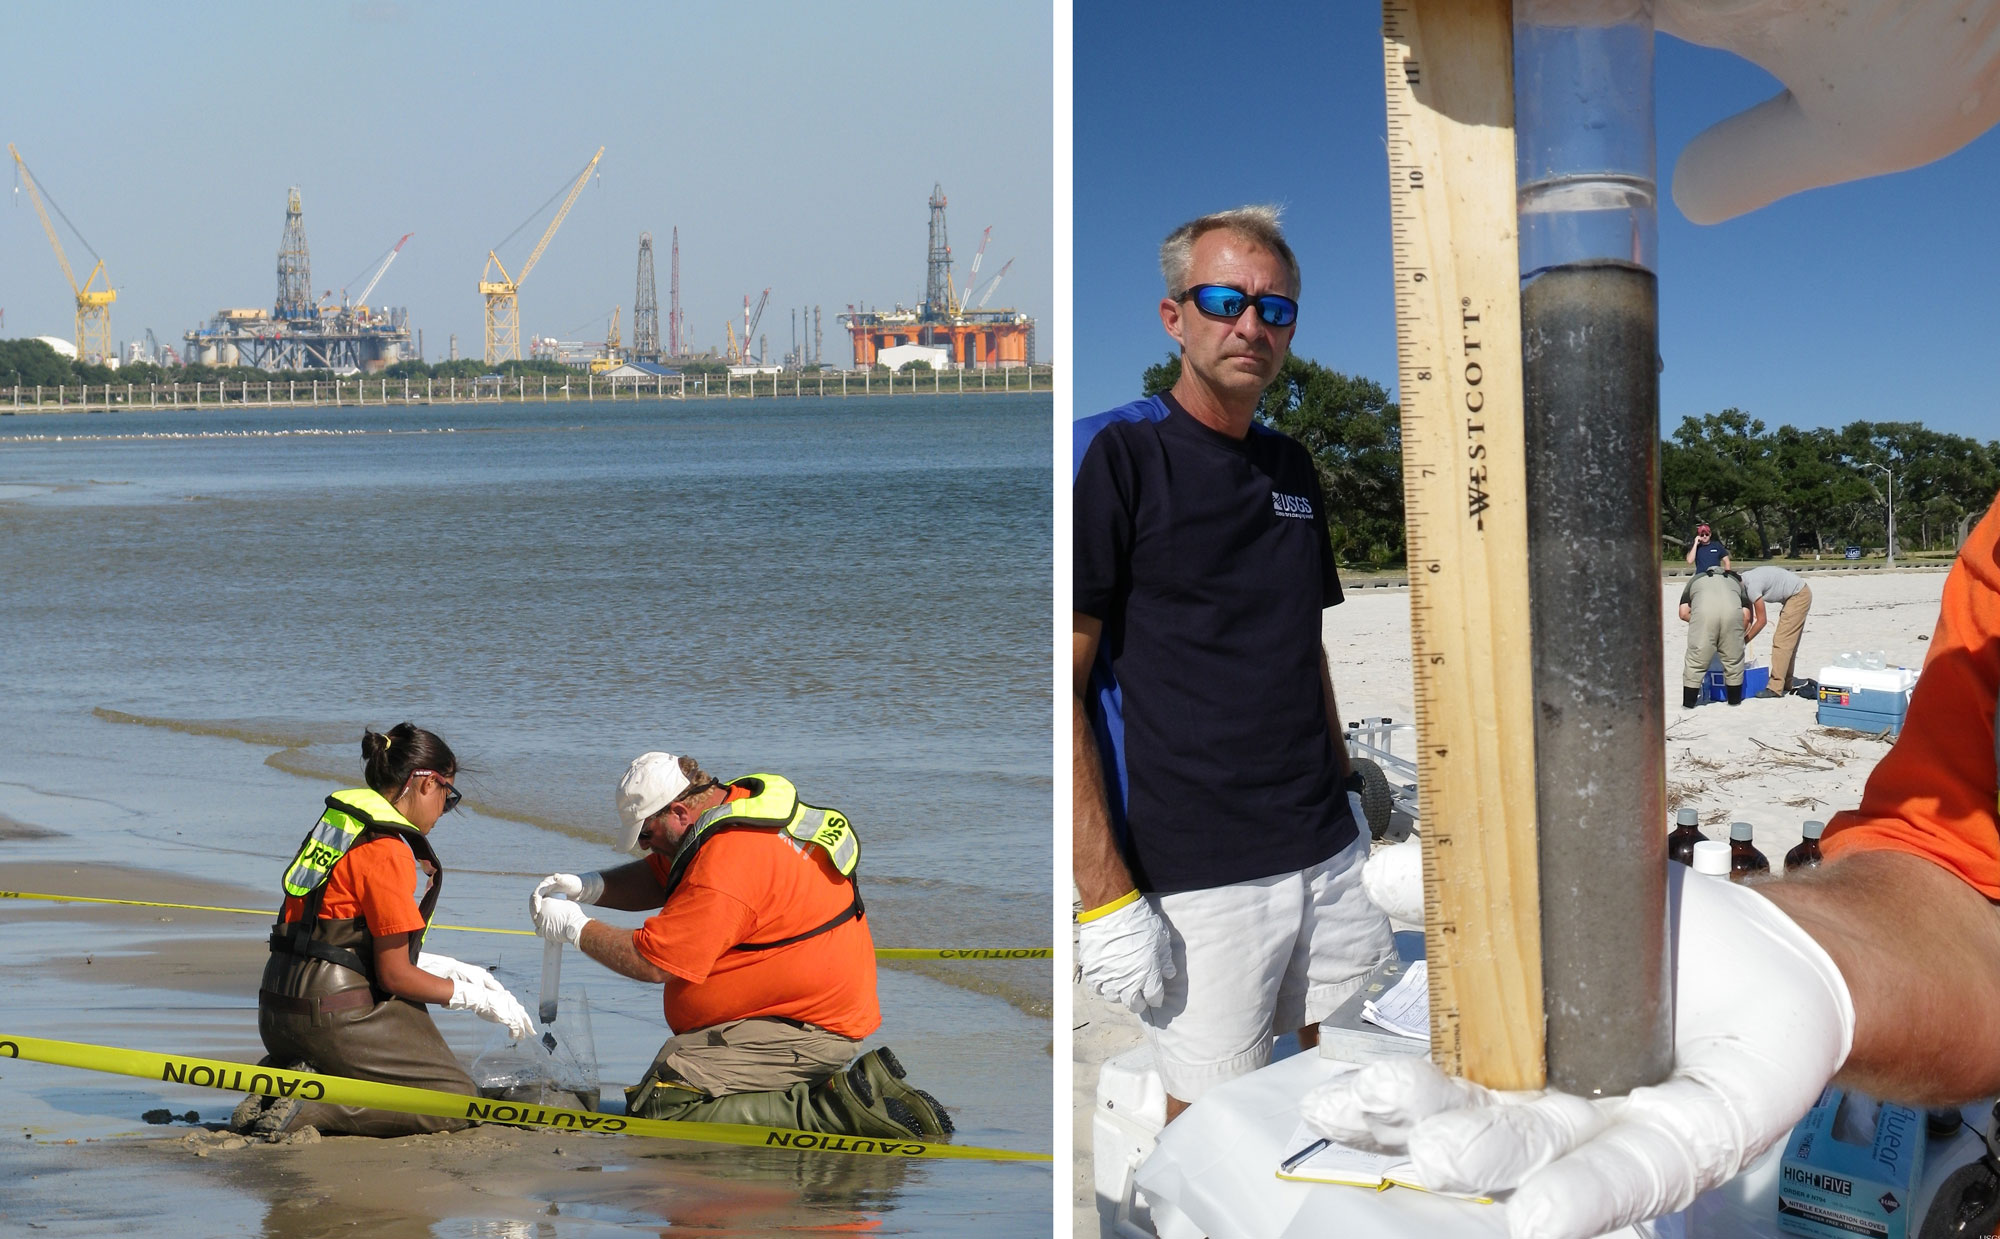 2-Panel image of scientists sample sediments on Pascagoula Beach in Mississippi. Panel 1: Two scientists on the beach with oil platforms in the background. Panel 2: A scientist showing a sediment core with other scientists in the background.